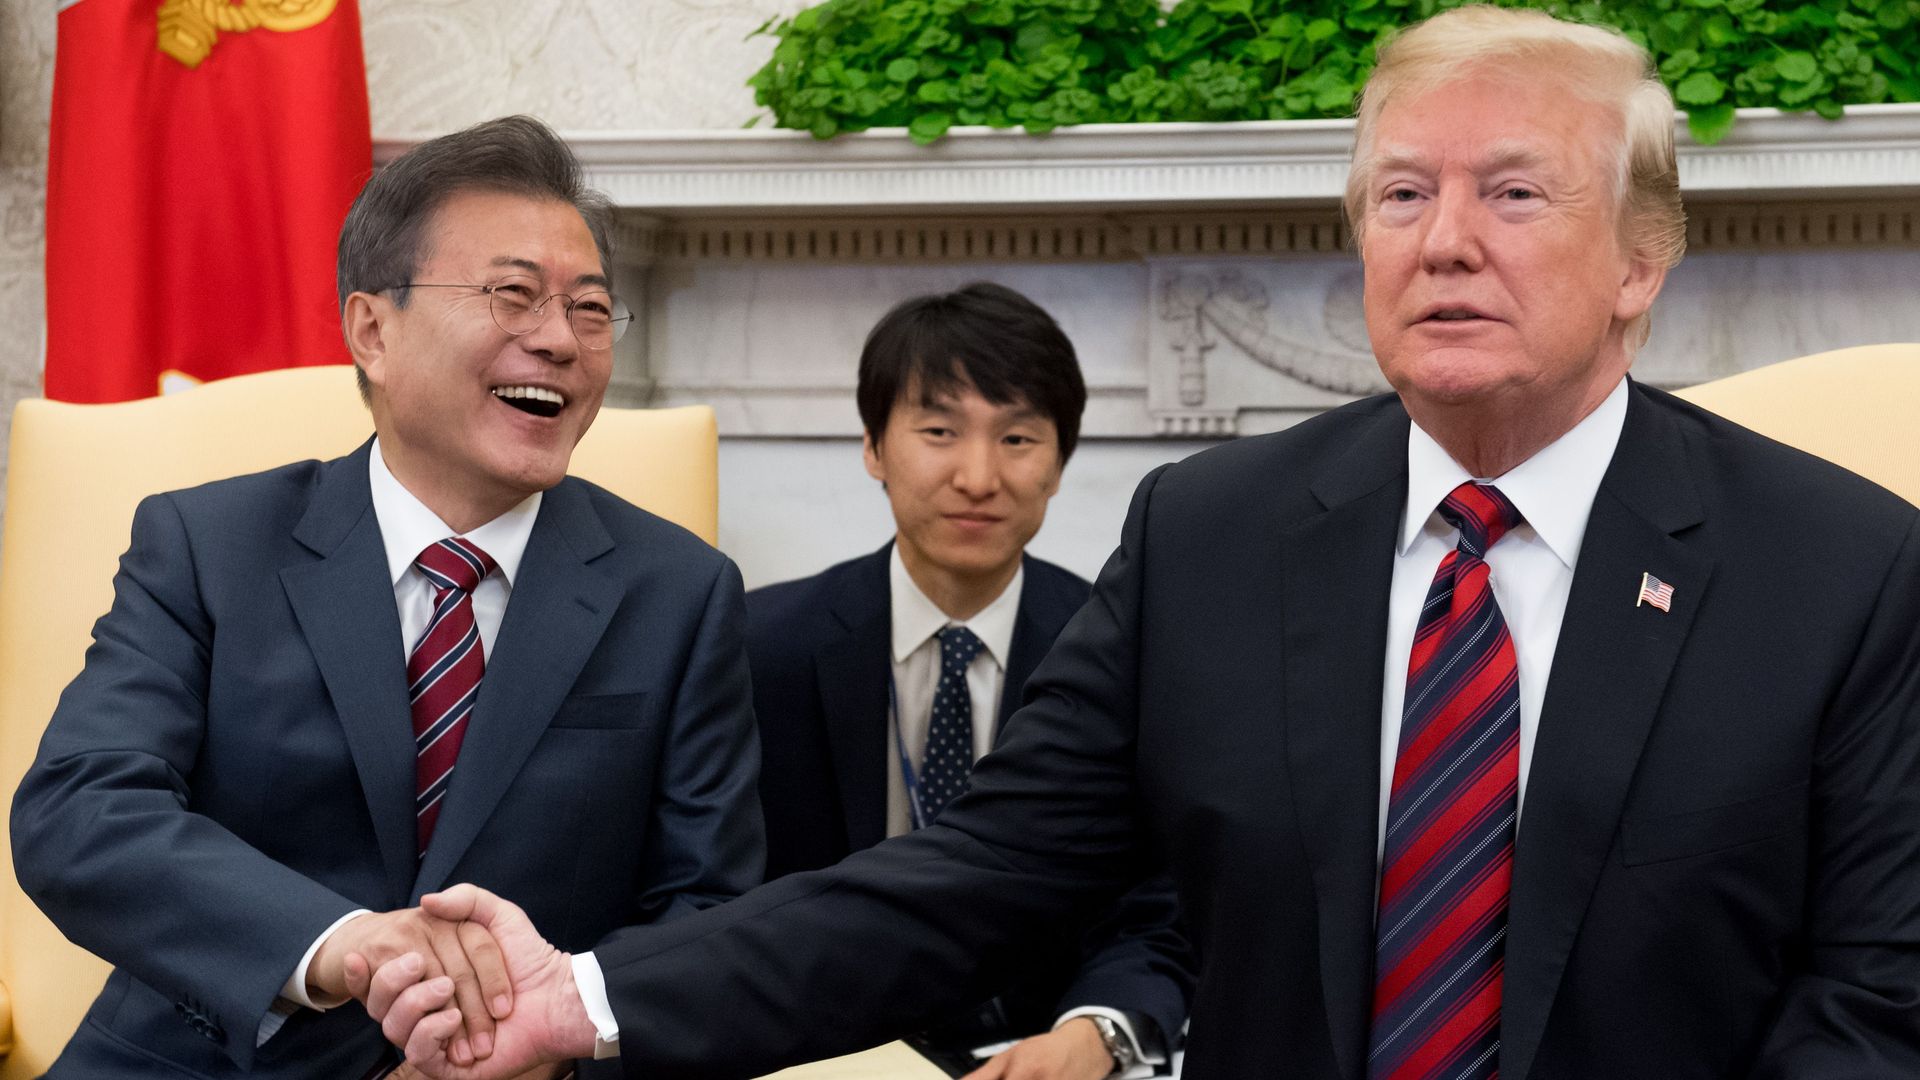 Presidents Moon Jae-in and Donald Trump shake hands at White House